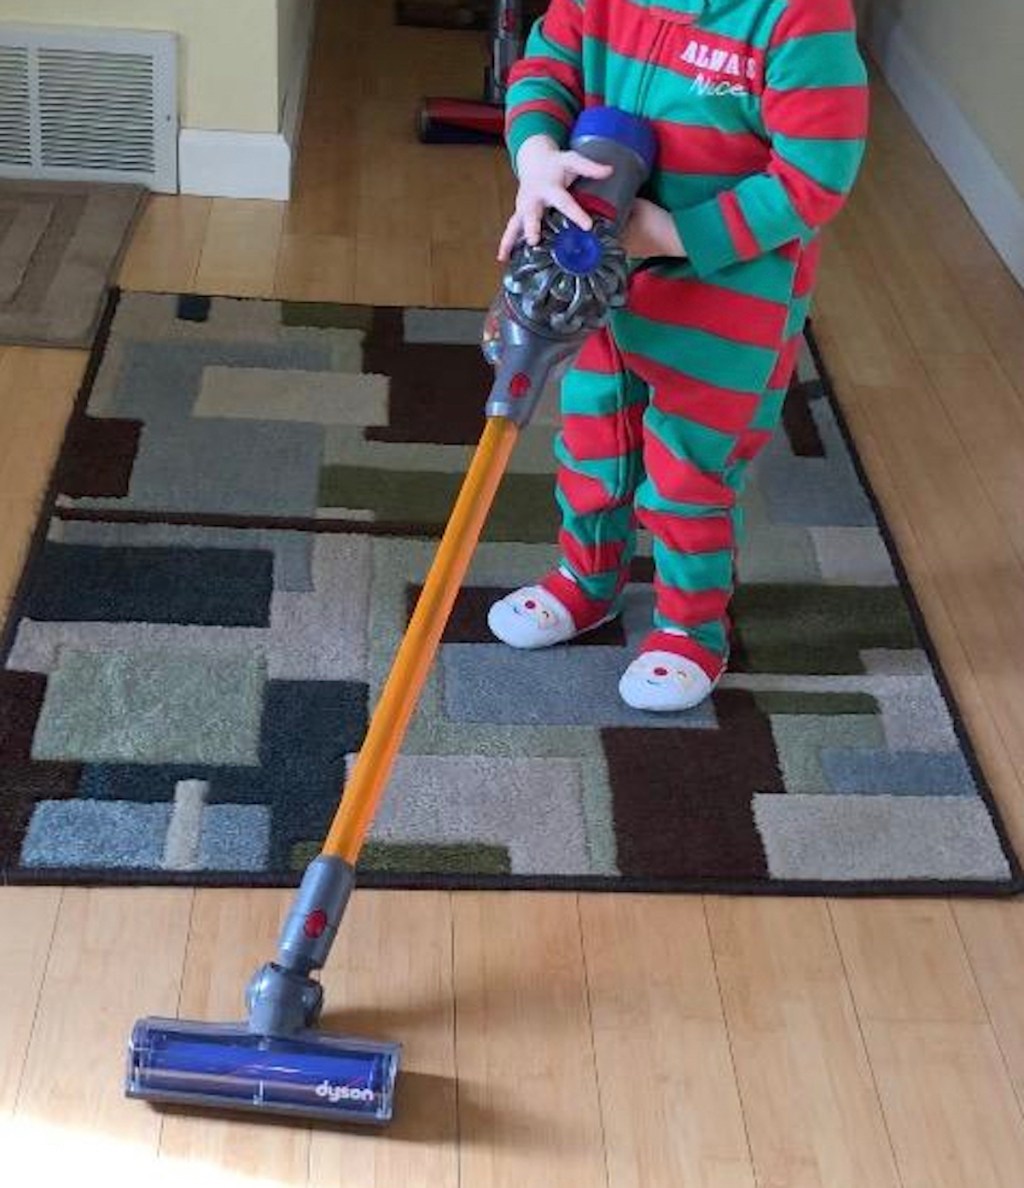 toddler pushing toy dyson vacuum cleaner on wood floor